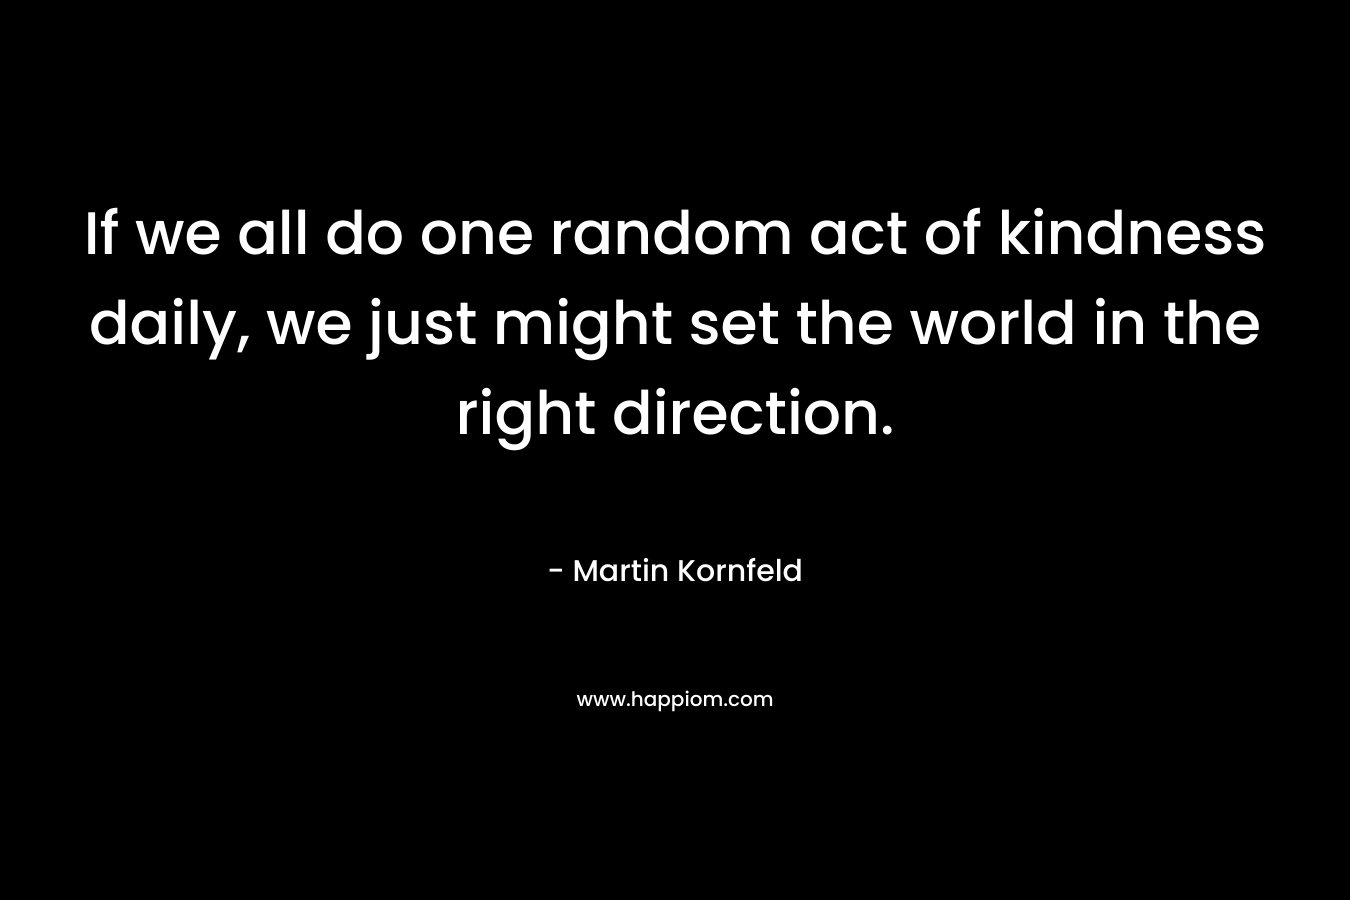 If we all do one random act of kindness daily, we just might set the world in the right direction.